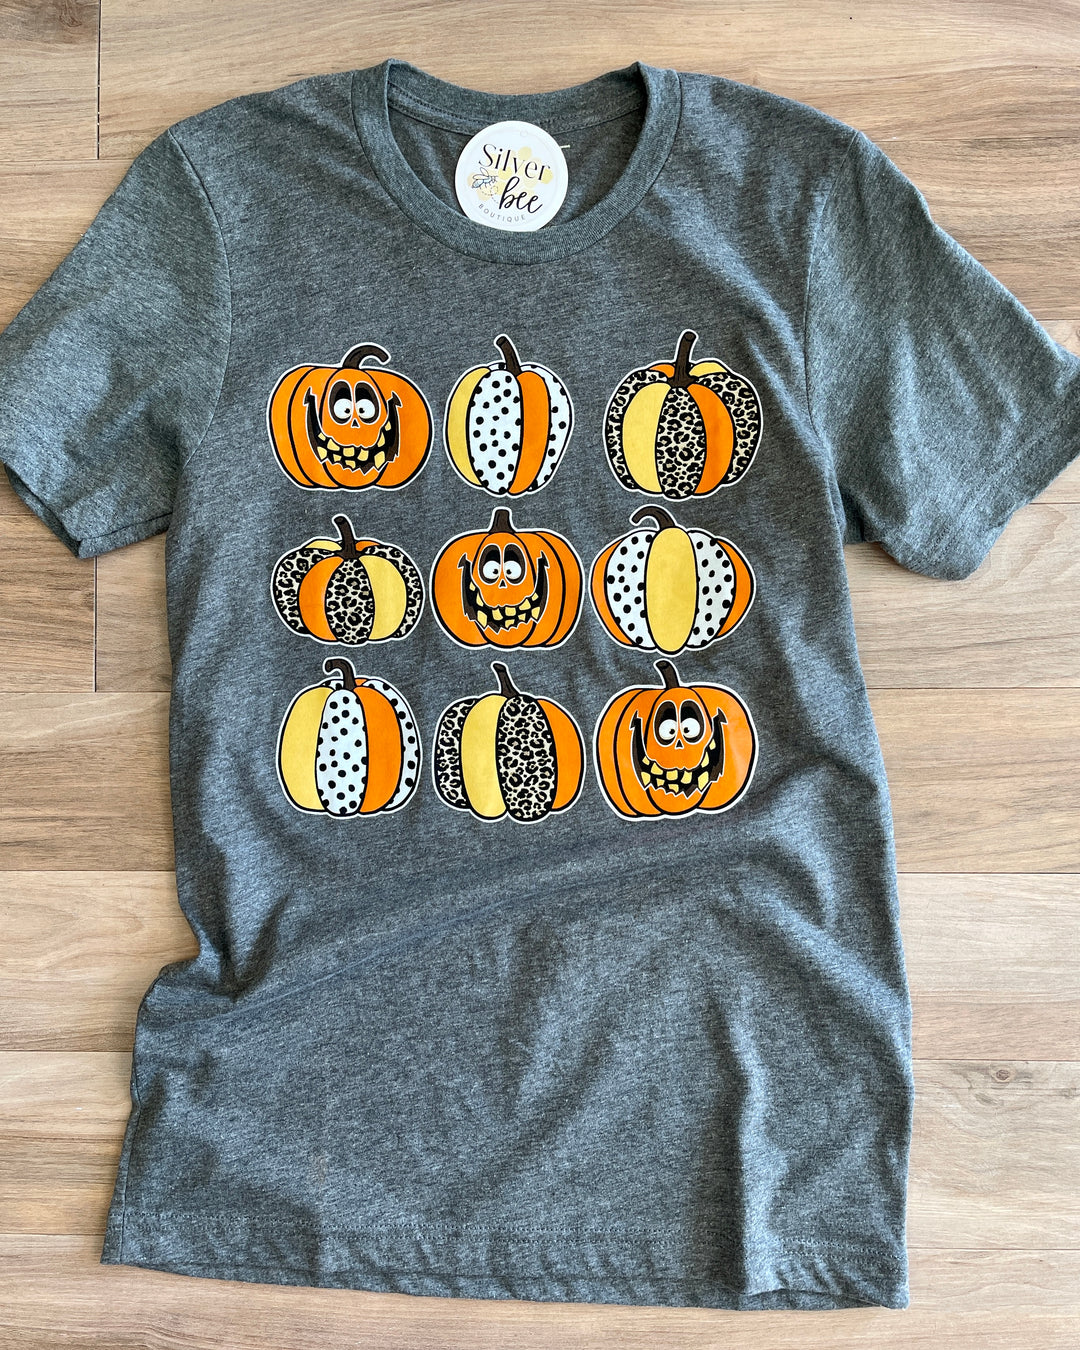 soft grey tee with 9 patterned pumpkins with silly faces